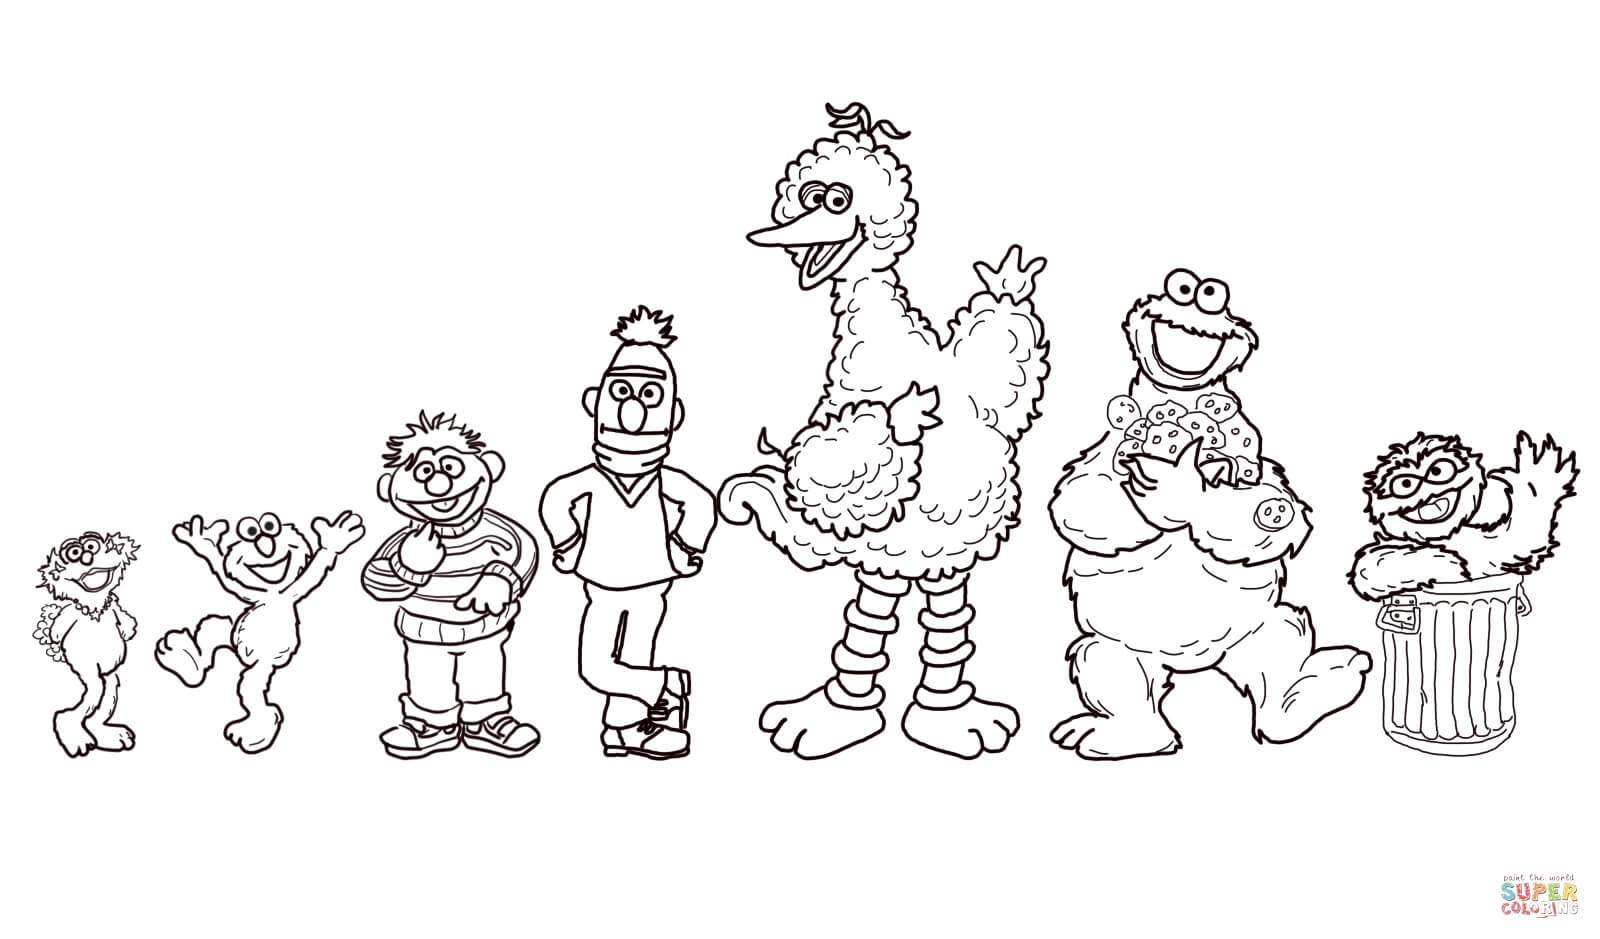 Sesame Street Characters Coloring Page | Free Printable Coloring Pages - Free Printable Coloring Pages Sesame Street Characters